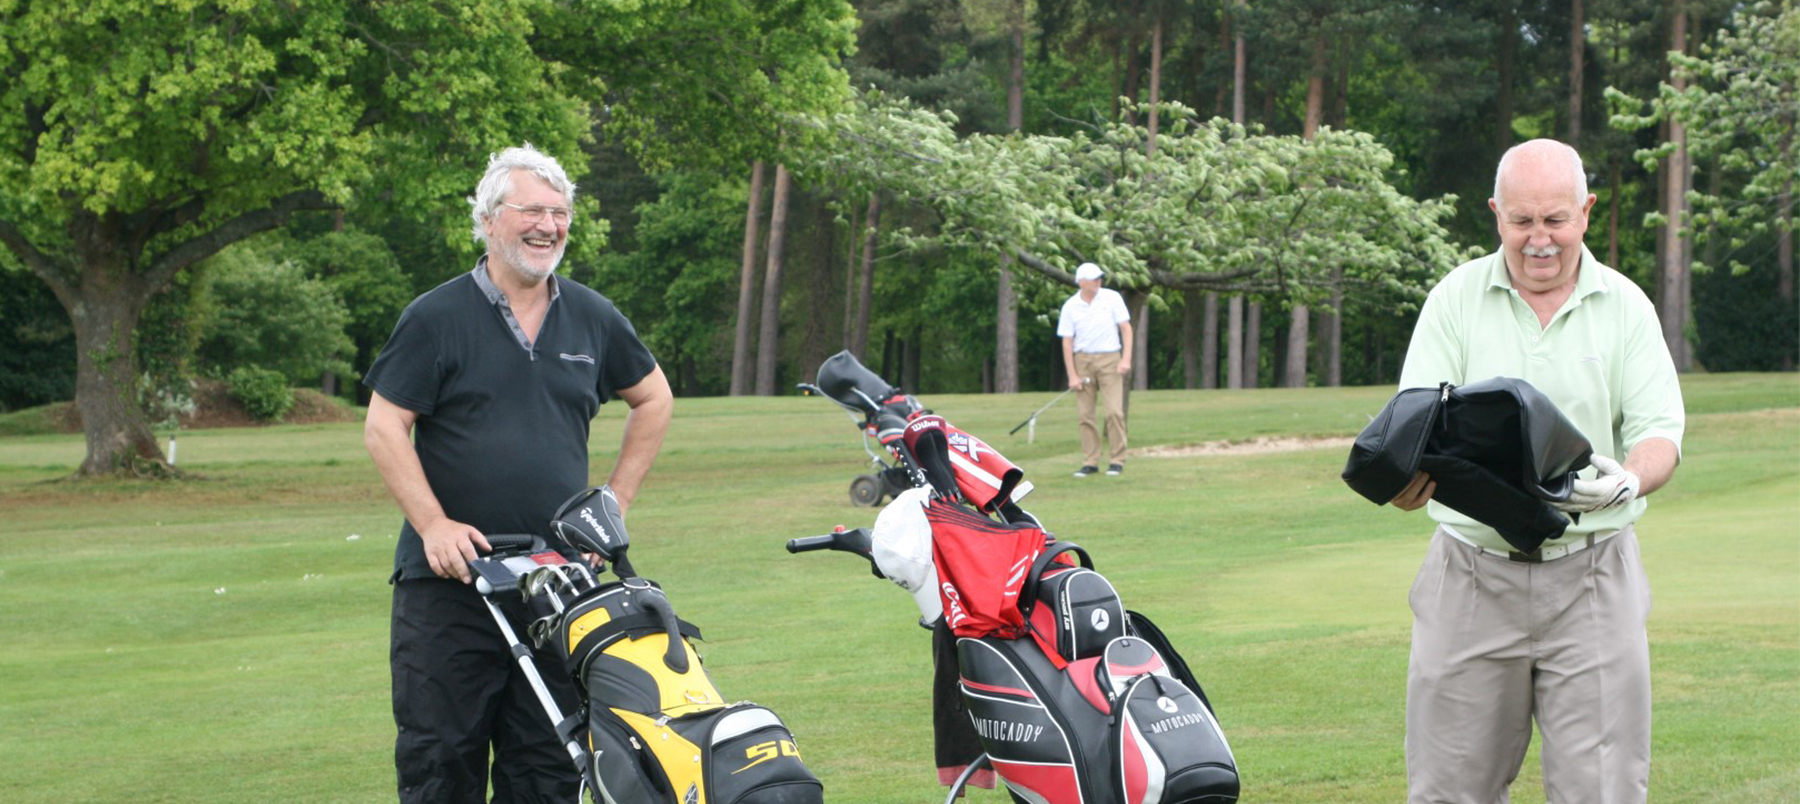 Alumni with golf bags stood on golf course